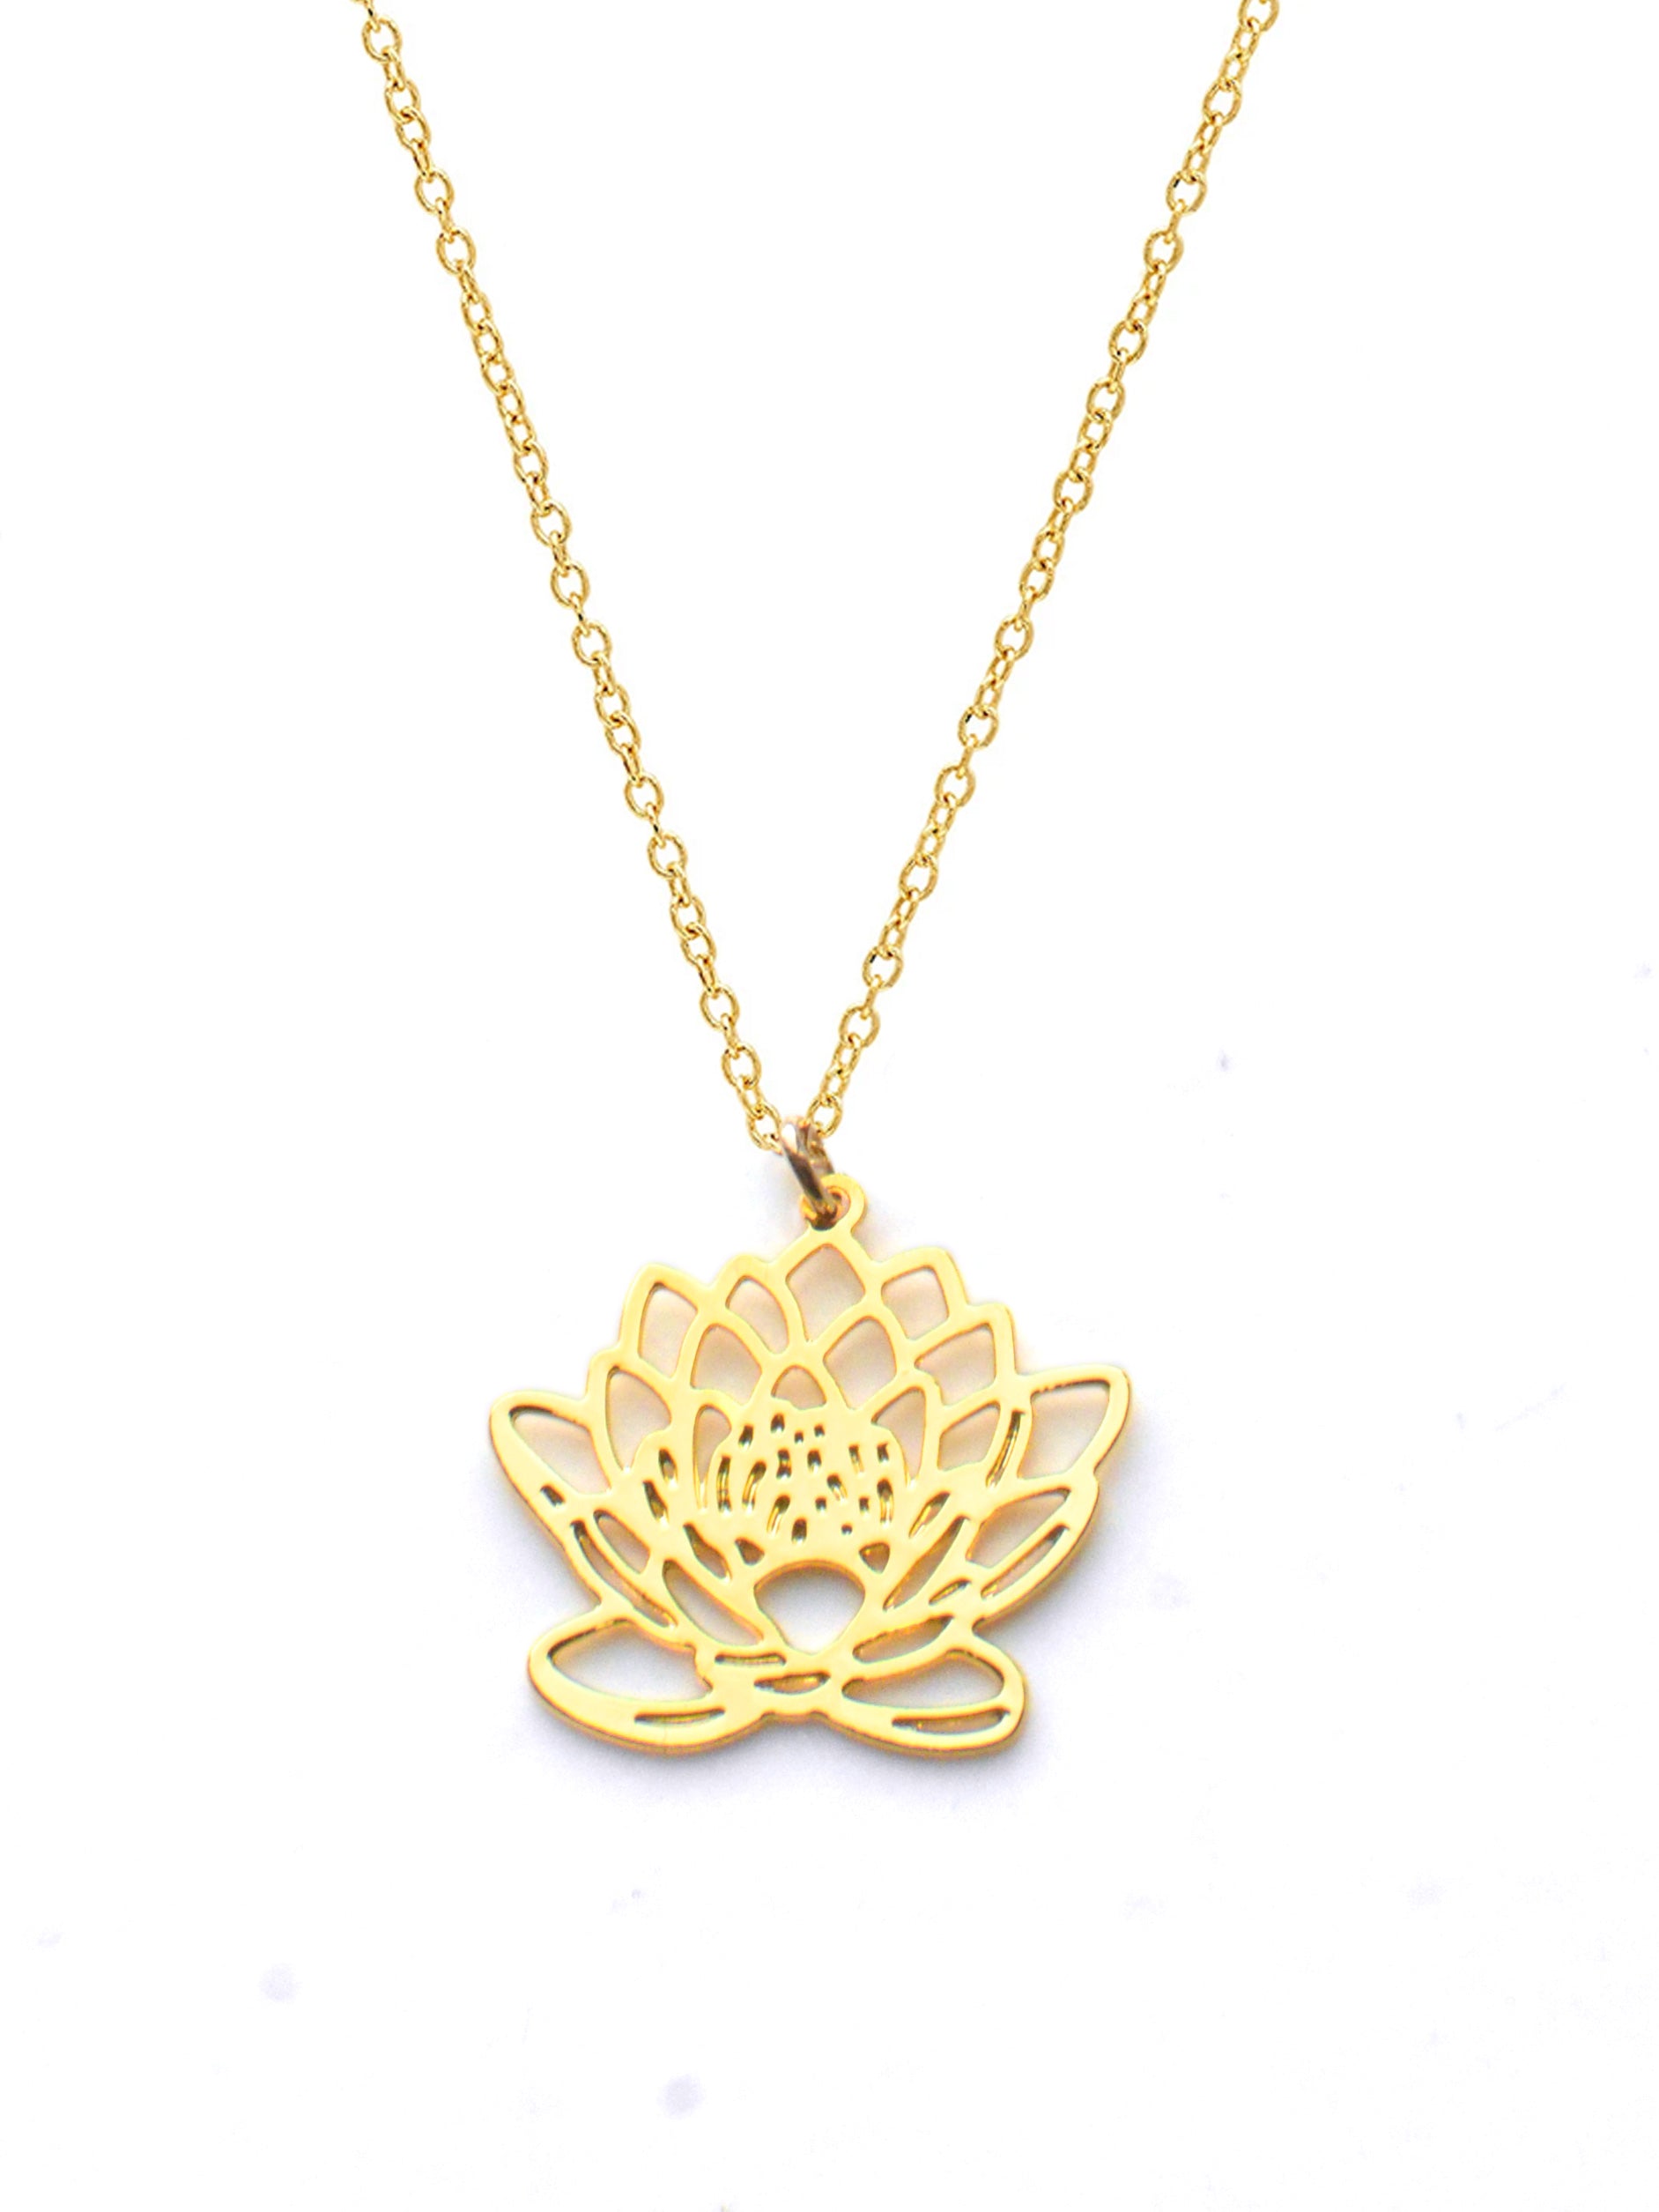 Water Lily Necklace - High Quality, Affordable, Whimsical, Hand Drawn Necklace - July Birthday Gift - Available in Gold and Silver - Made in USA - Brevity Jewelry